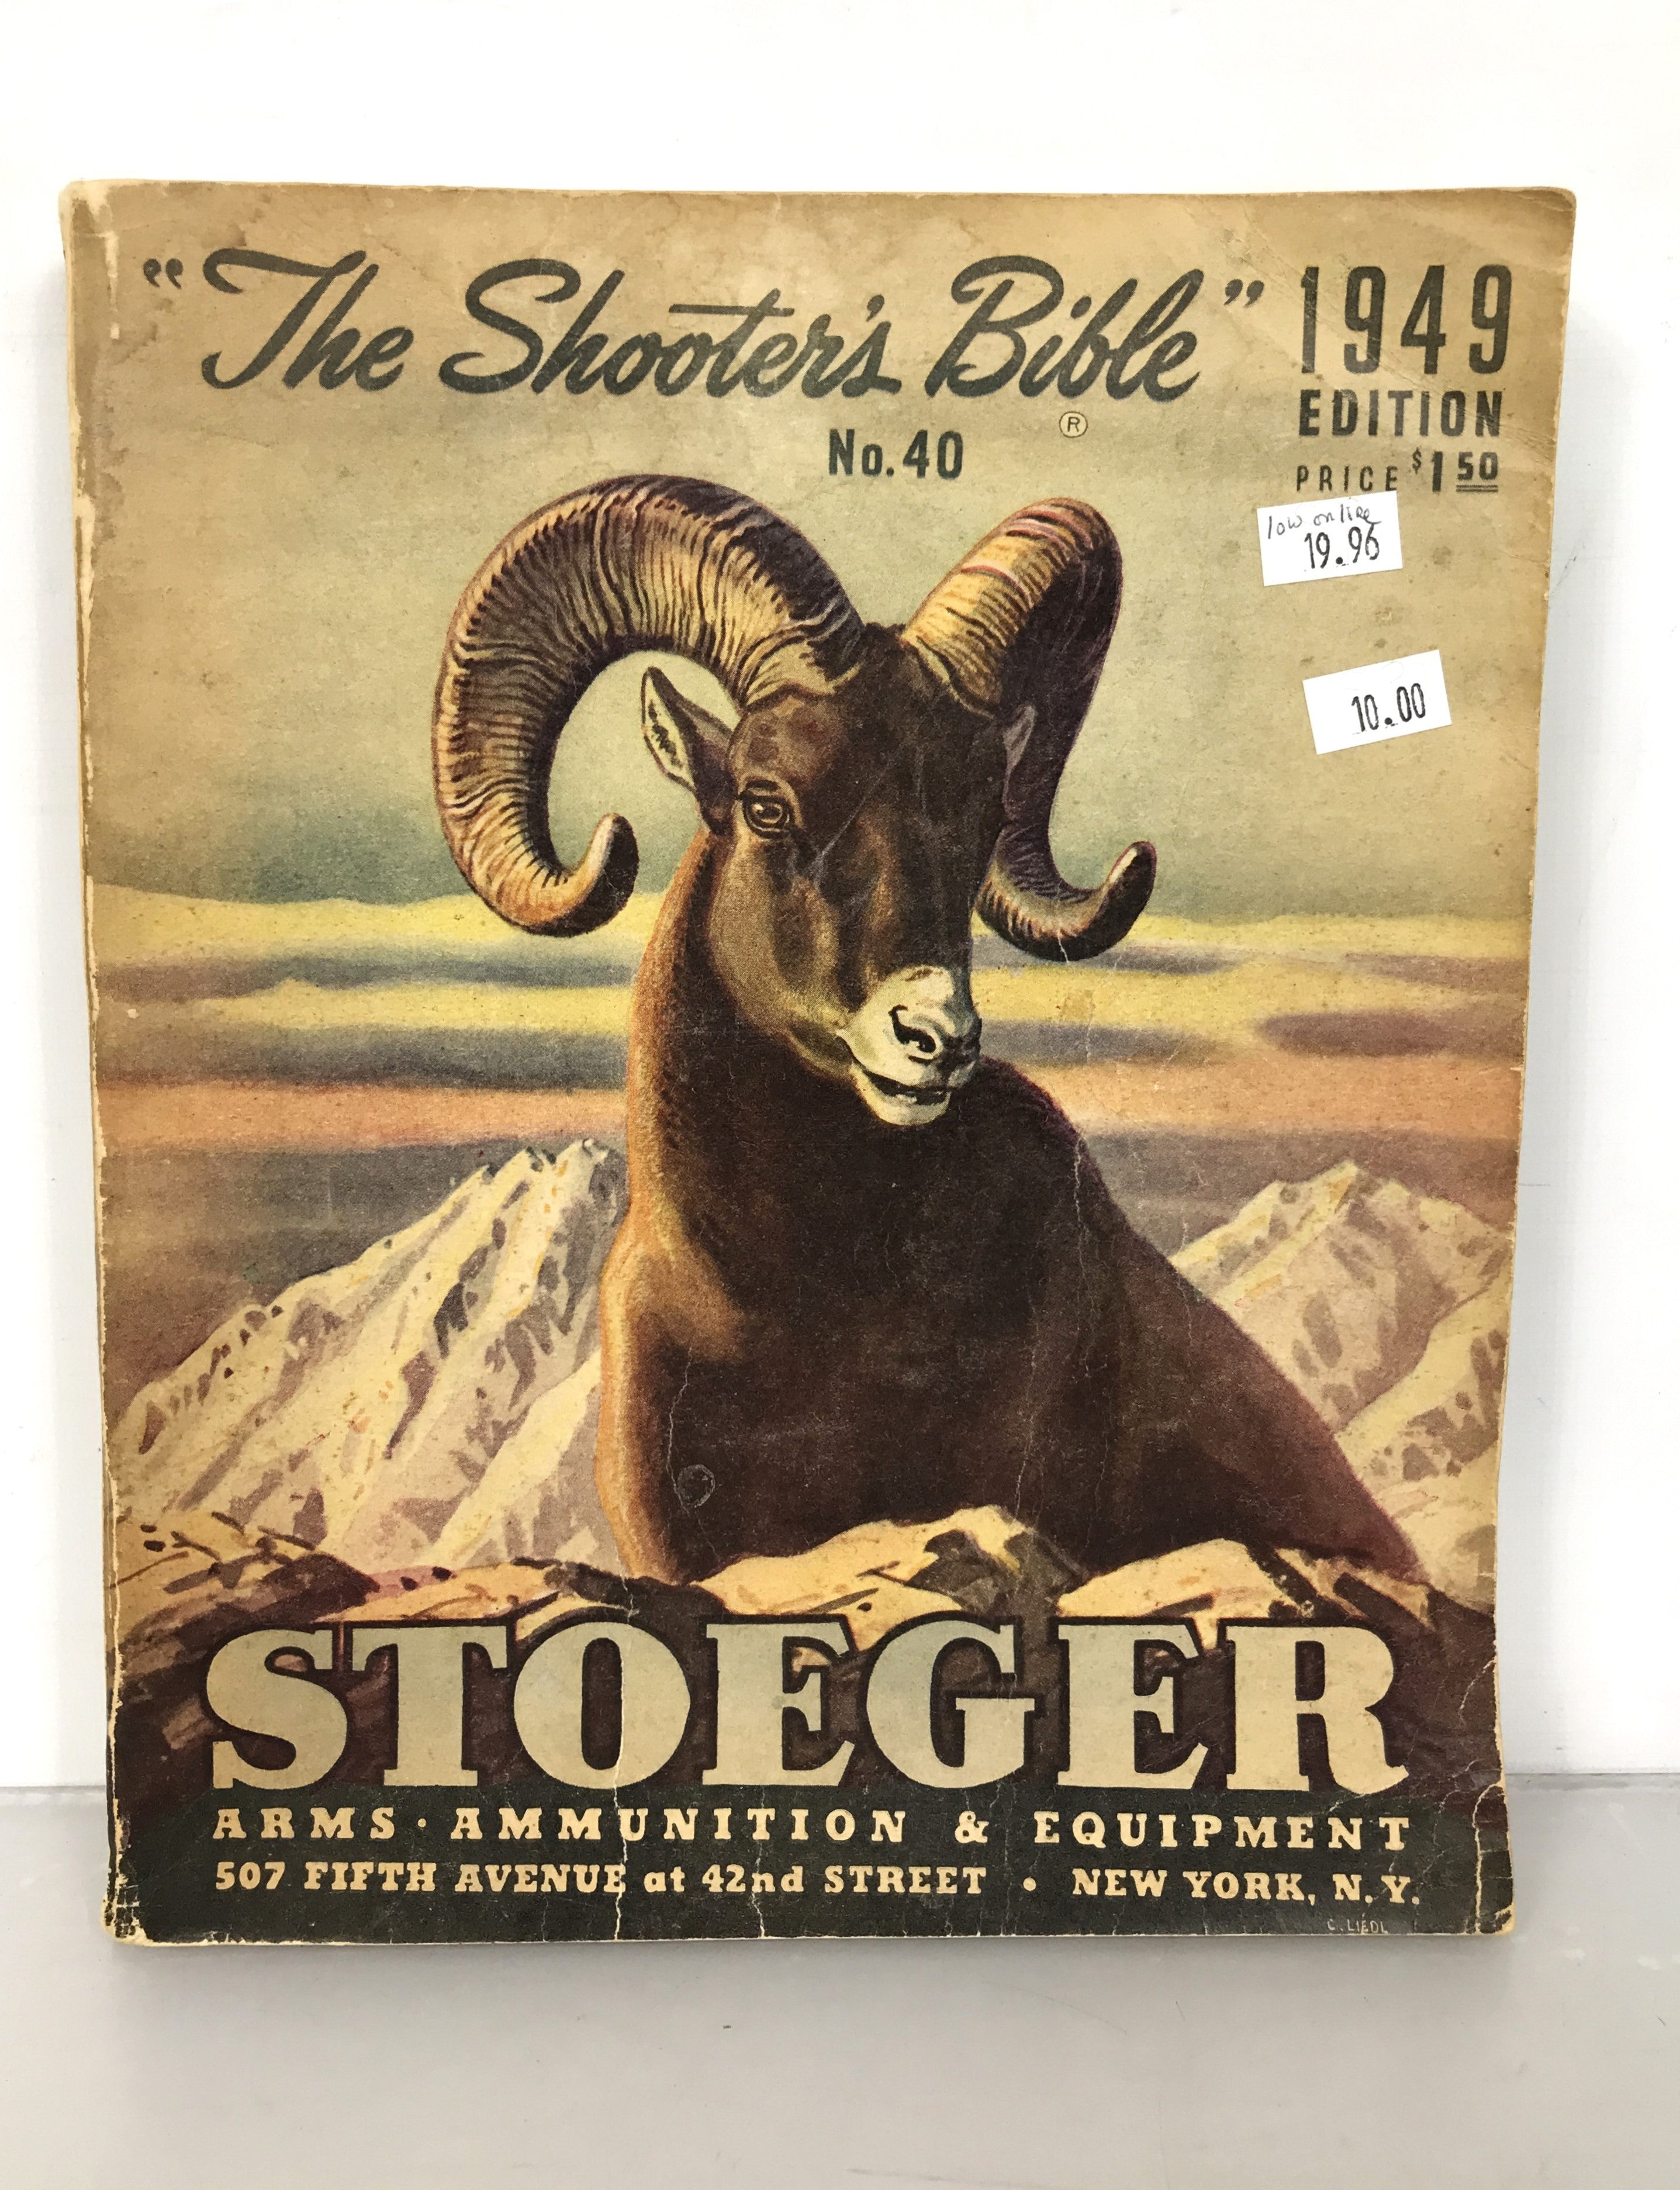 Stoeger The Shooter's Bible No. 40 1949 Edition SC